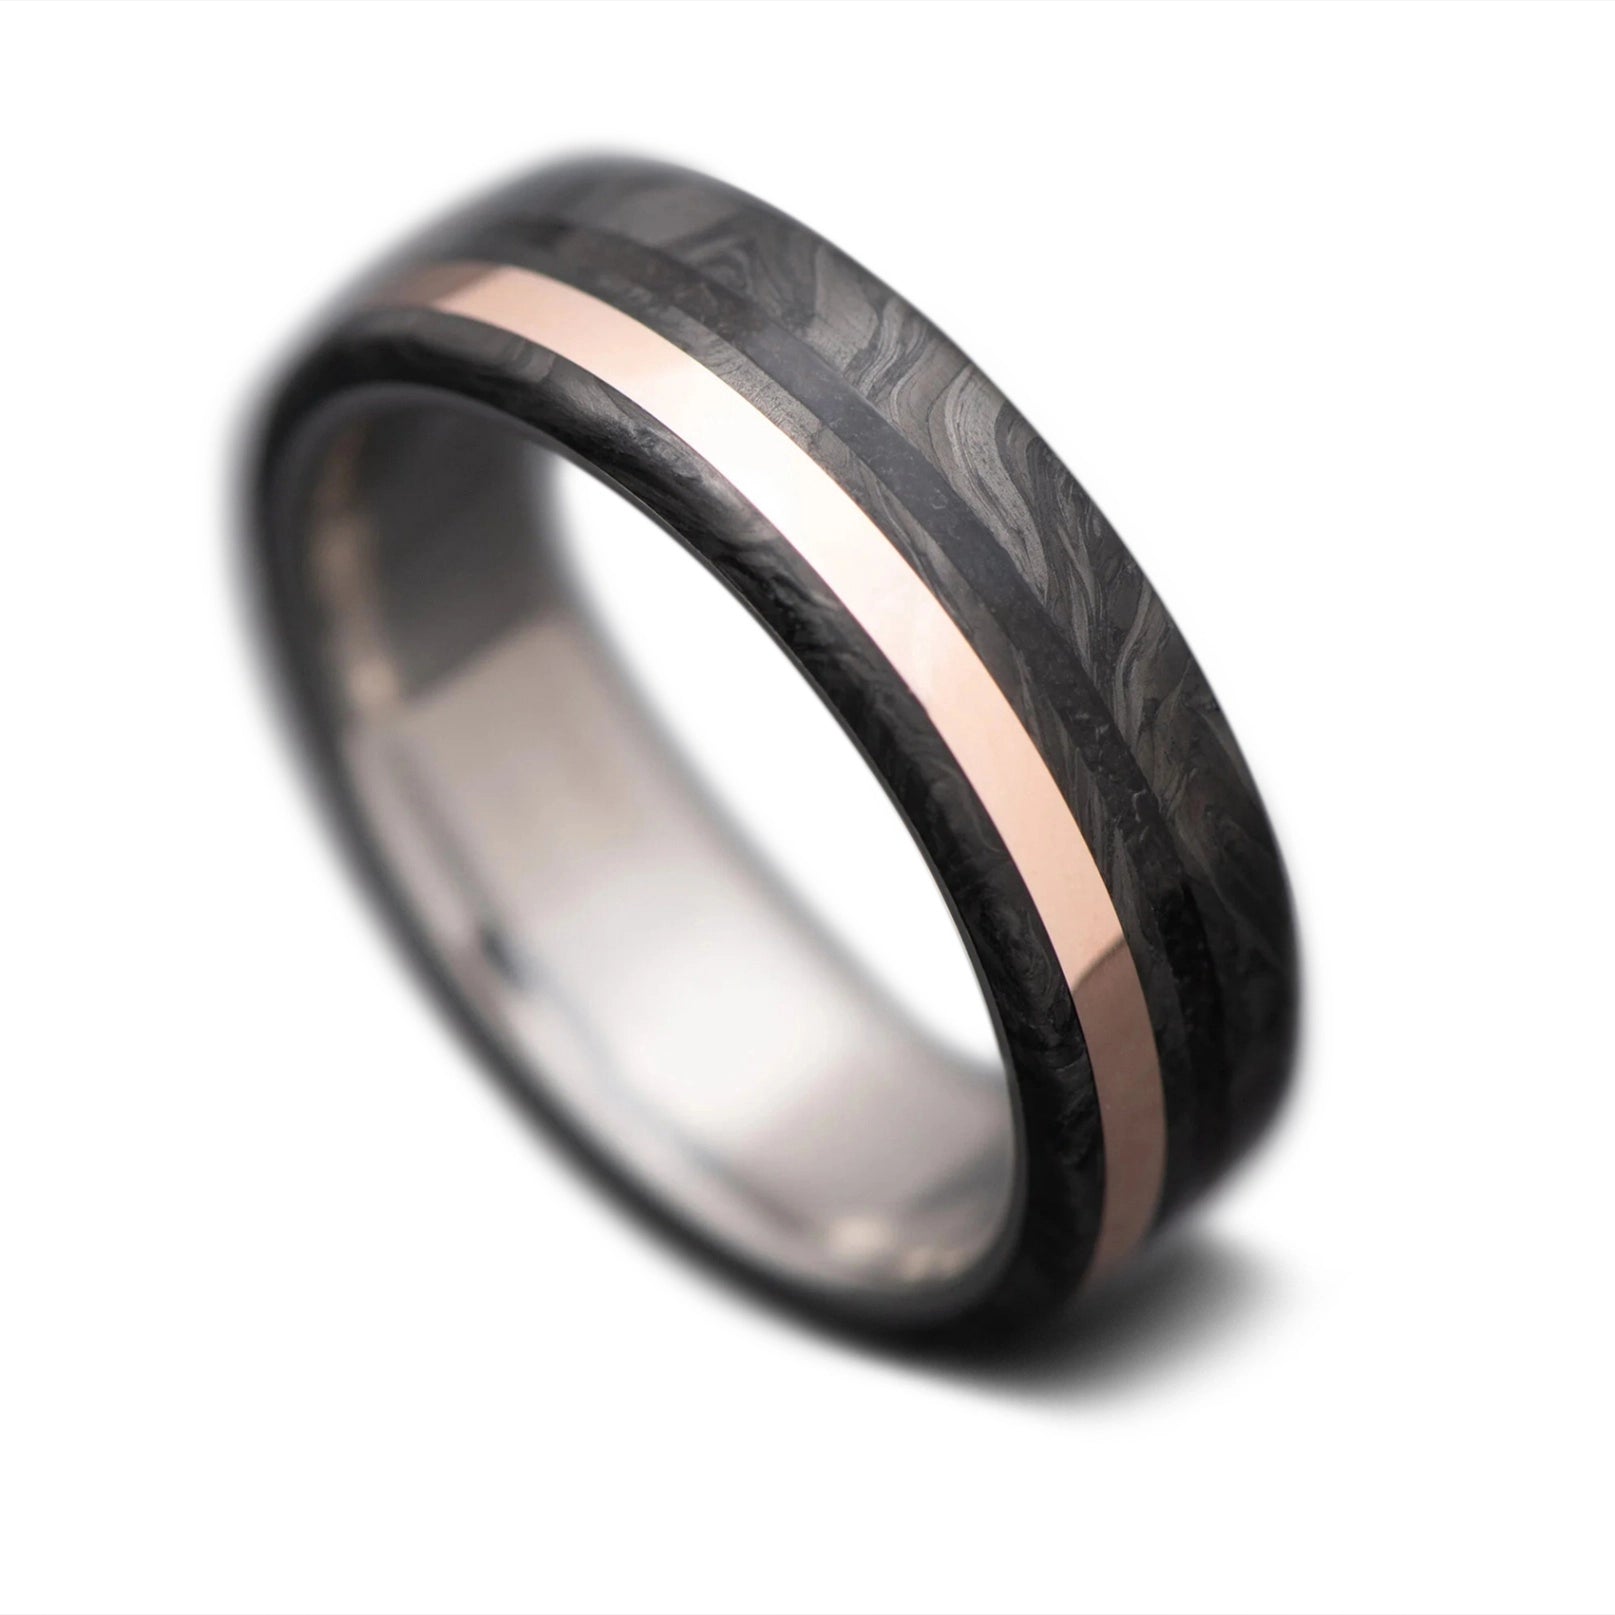 CarbonForged Core Ring with  Black Onyx, Rose Gold inlay and Titanium inner sleeve, 7mm - THE ODYSSEY